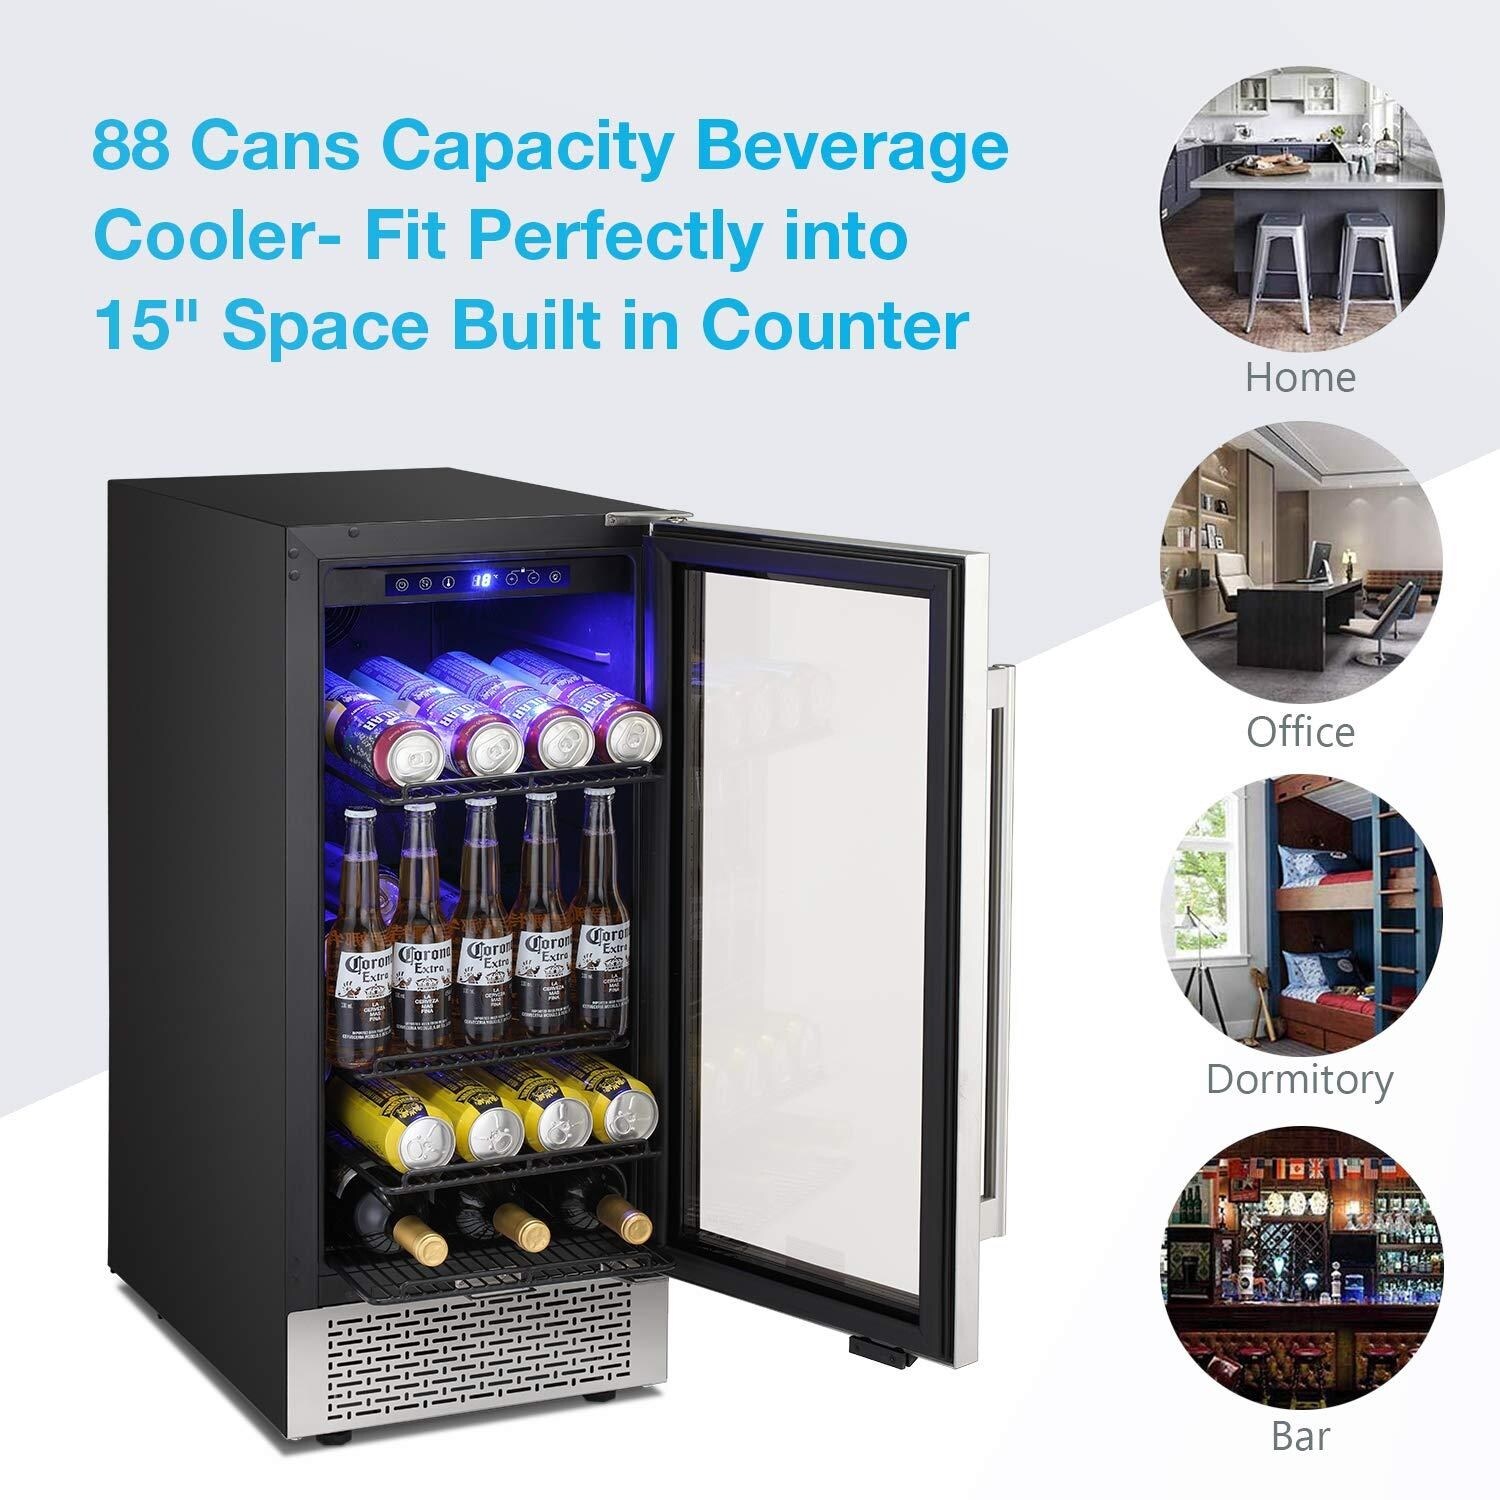 NewAir 15 inch Wine and Beverage Refrigerator - 13 Bottles & 48 Cans Capacity with Dual Temperature Zones, Black Stainless Steel